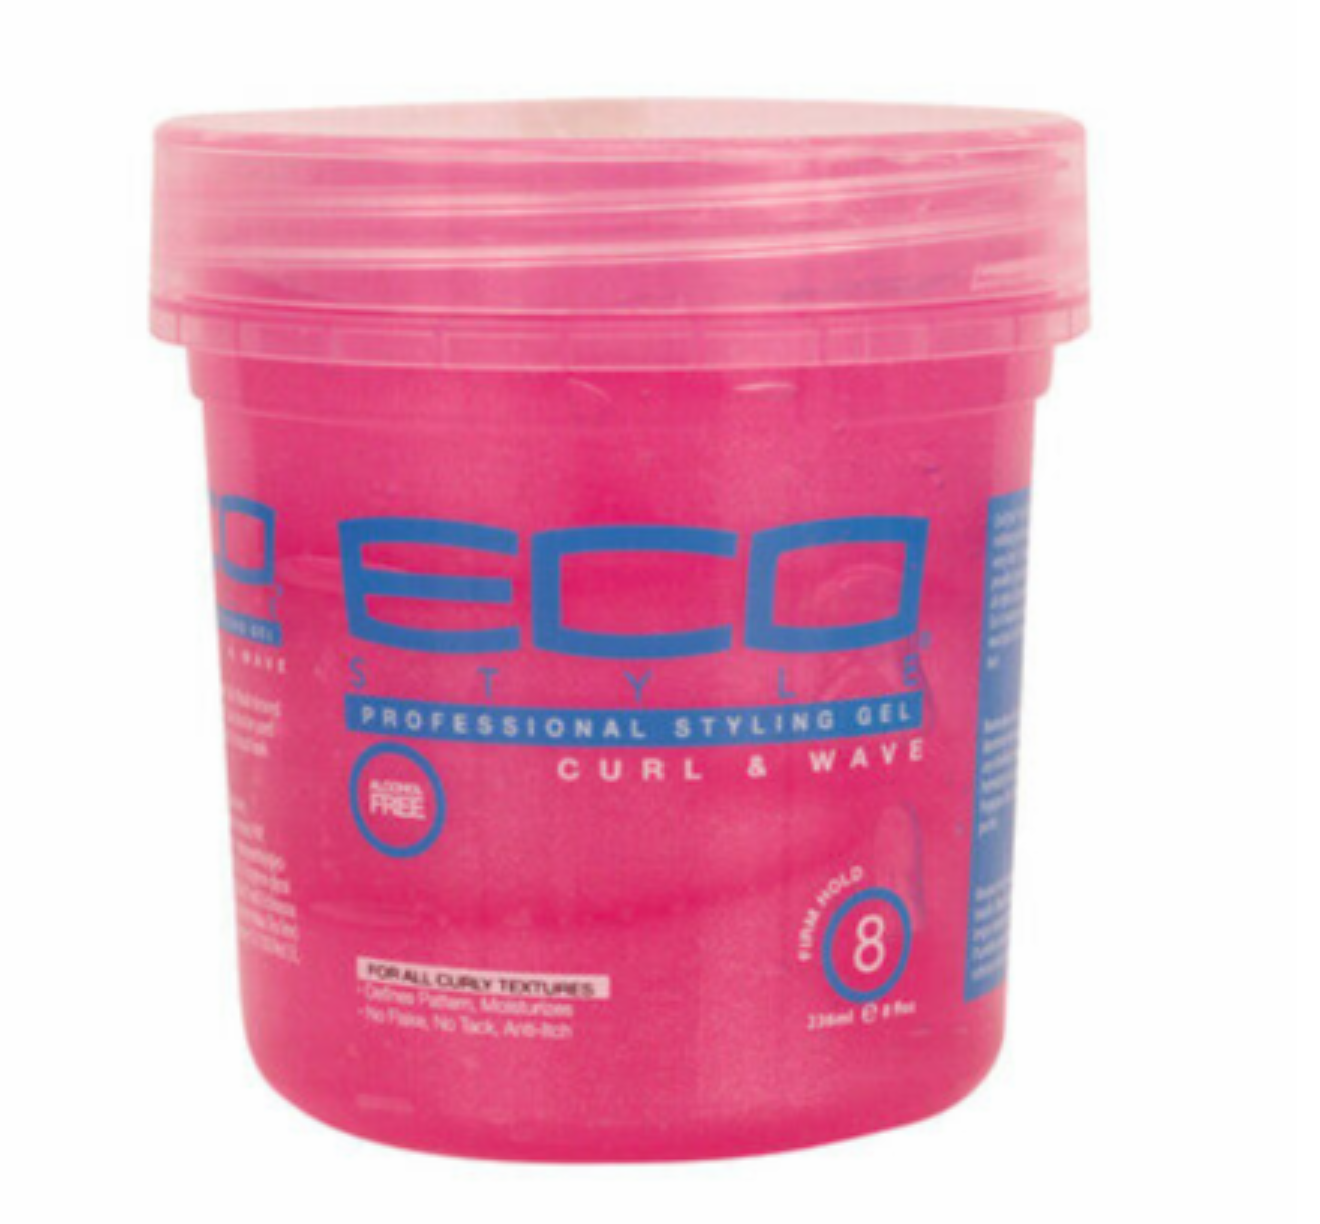 ECO CURL & WAVE STYLING GEL – This Is It Hair World